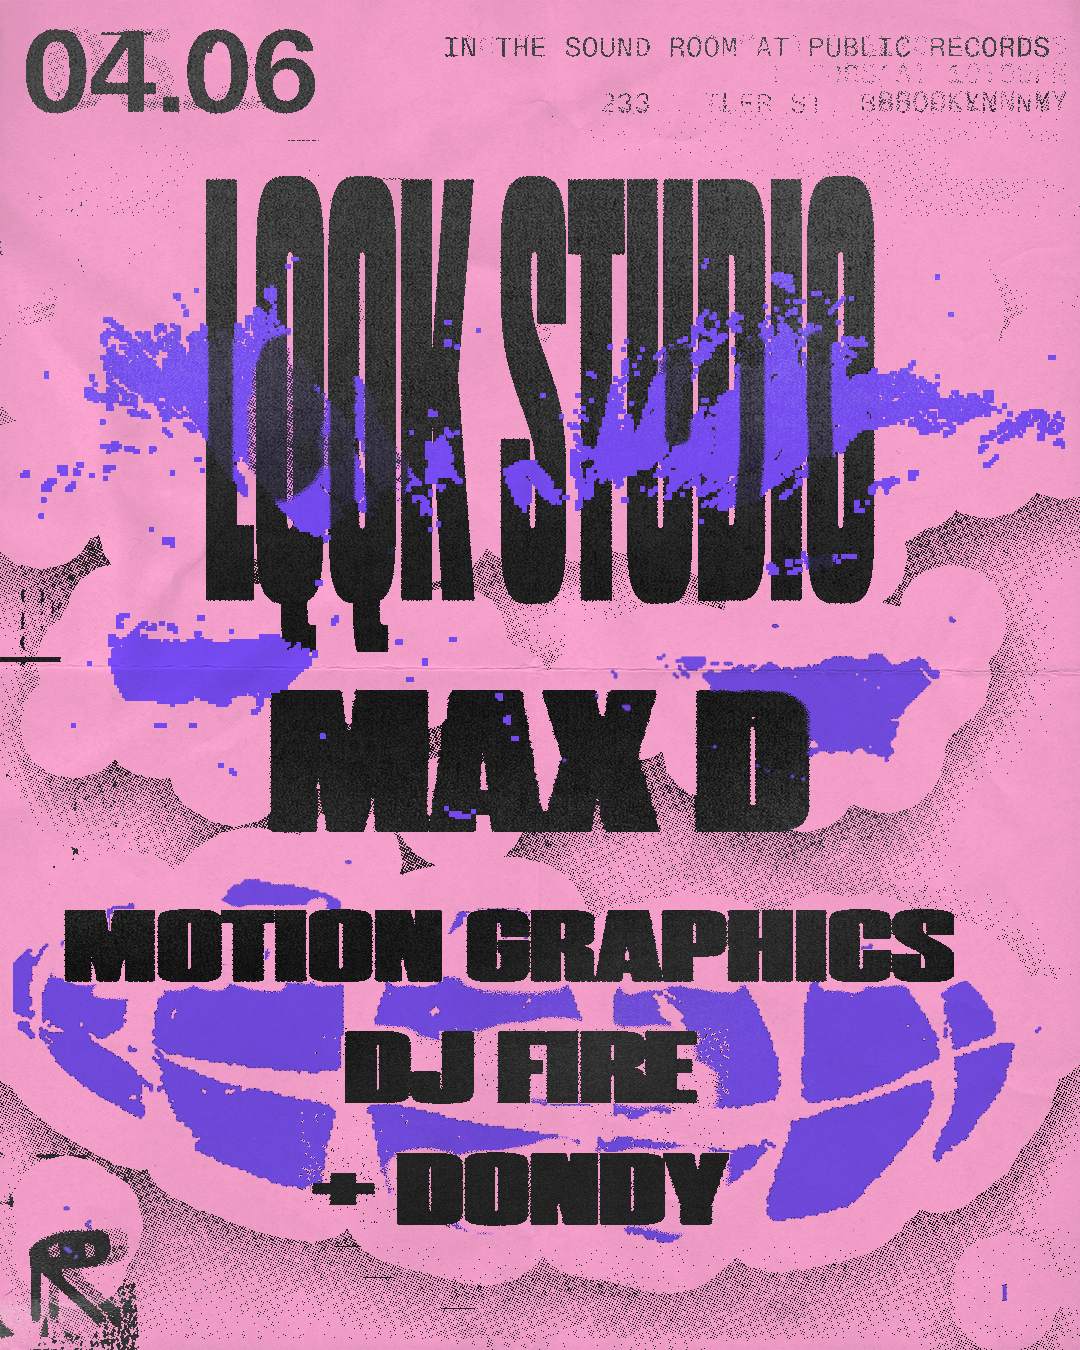 LQQK Studio with Max D + Motion Graphics + DJ Fire & Dondy - フライヤー表